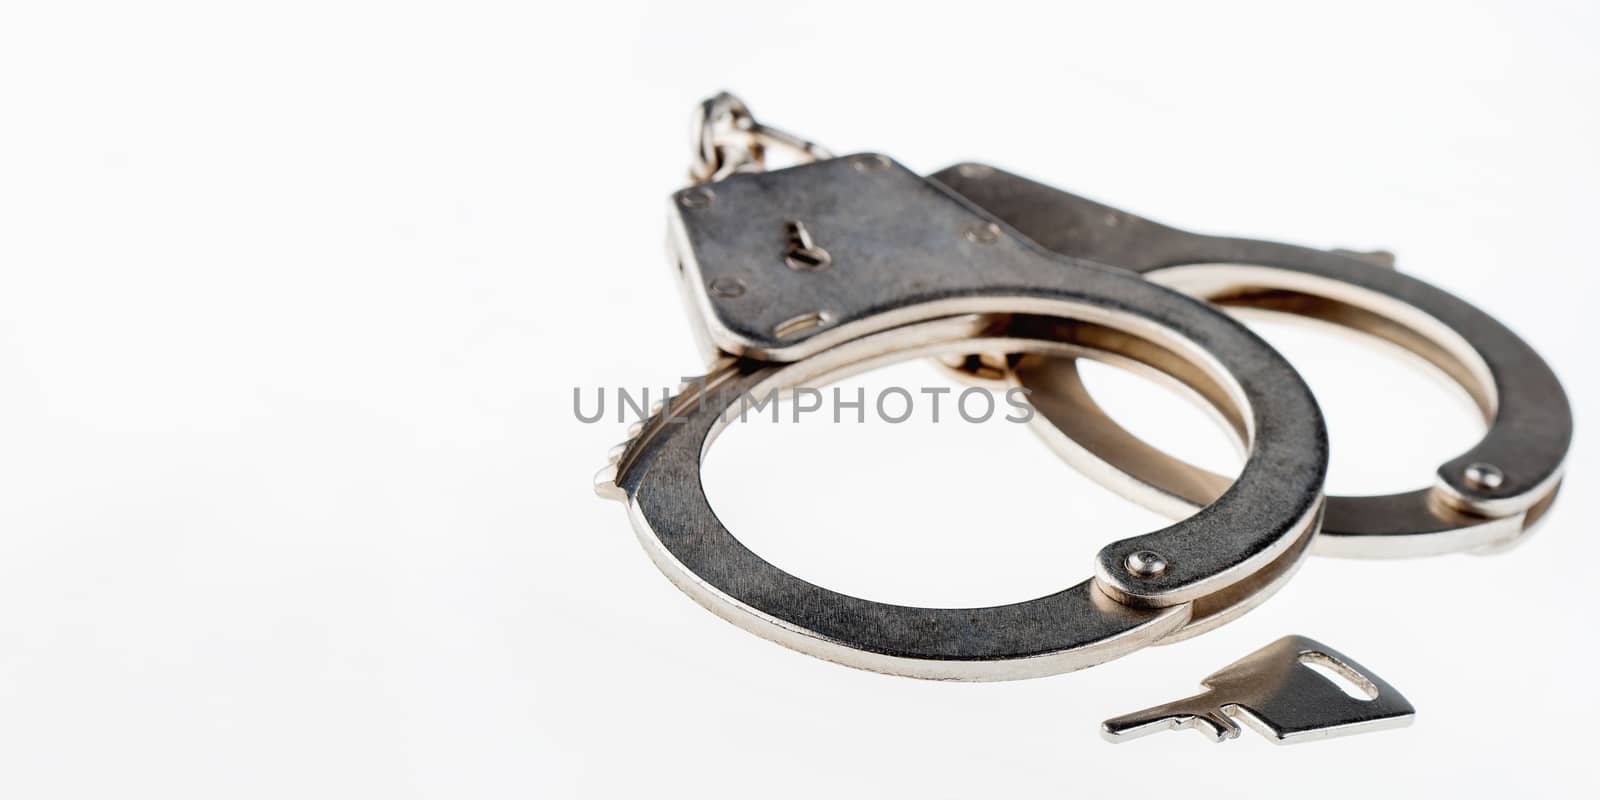 Locked handcuffs on wooden background. Legal responsibility for violating or crime. Banner with white copy space.